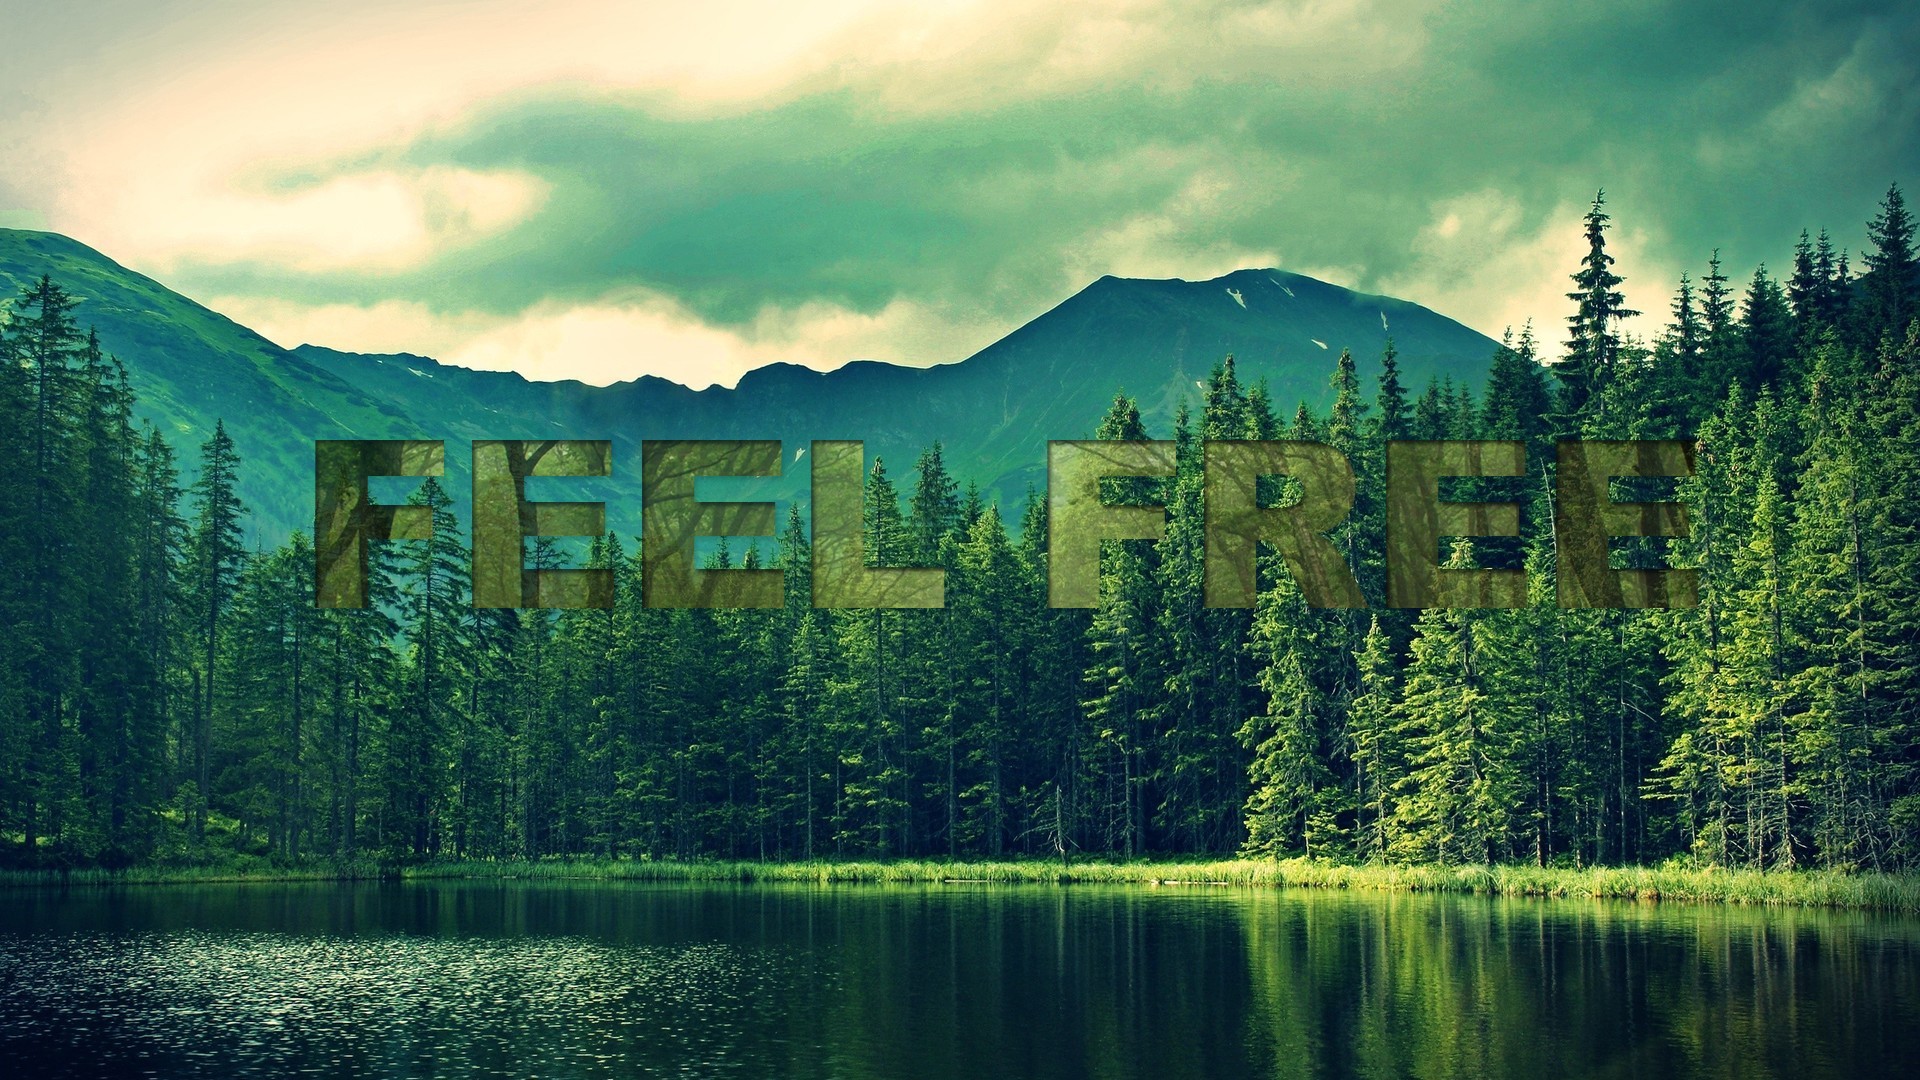 General 1920x1080 trees typography water nature mountains landscape